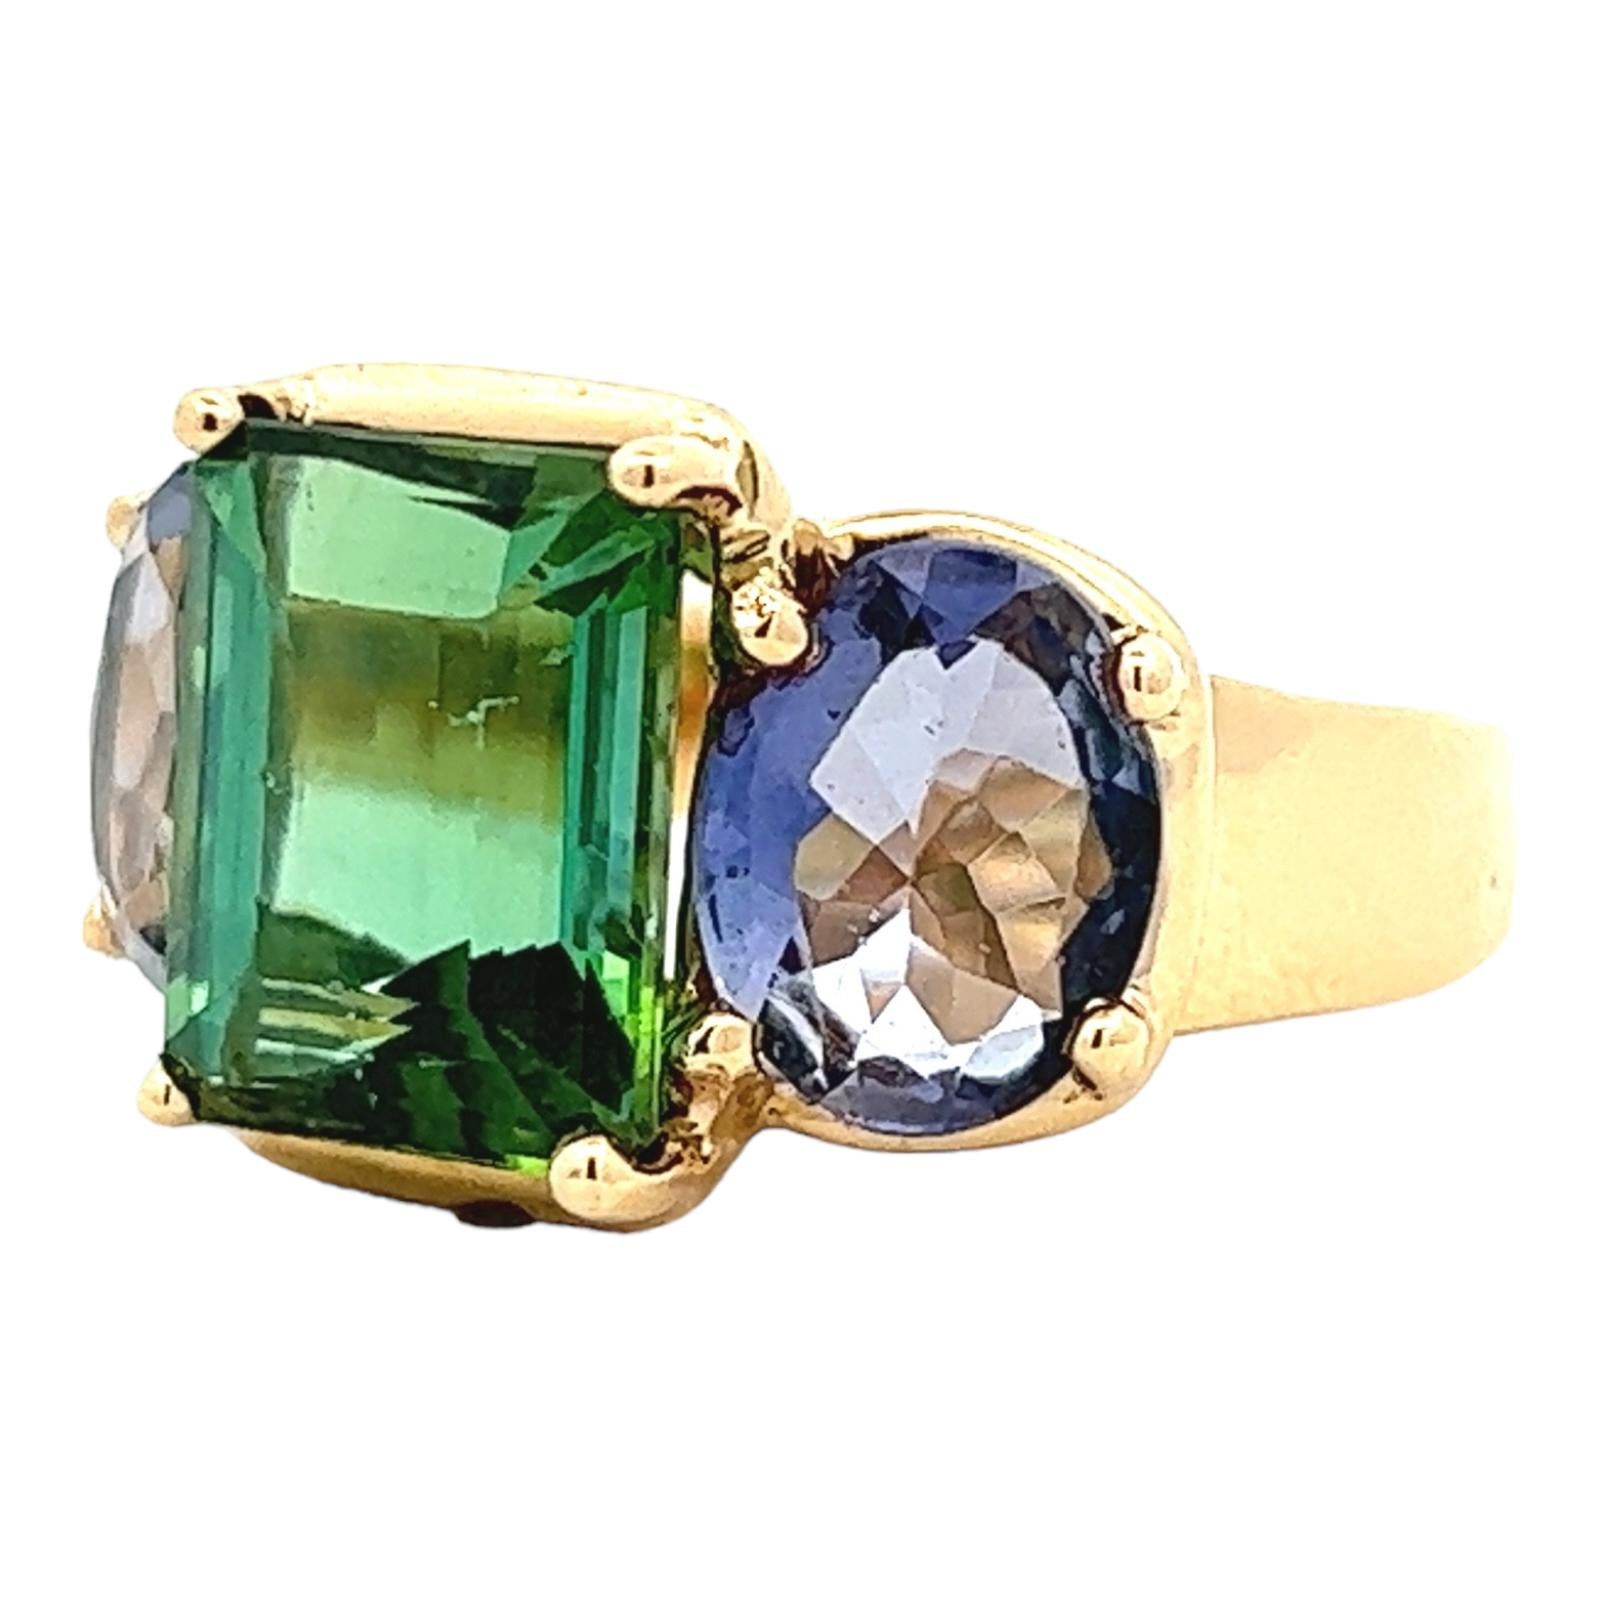 Beautiful green tourmaline and tanzanite cocktail ring handcrafted in 18 karat yellow gold. The colorful gemstone ring features an approximately 6 carat emerald cut green tourmaline gemstone flanked by two oval tanzanite gemstones weighing